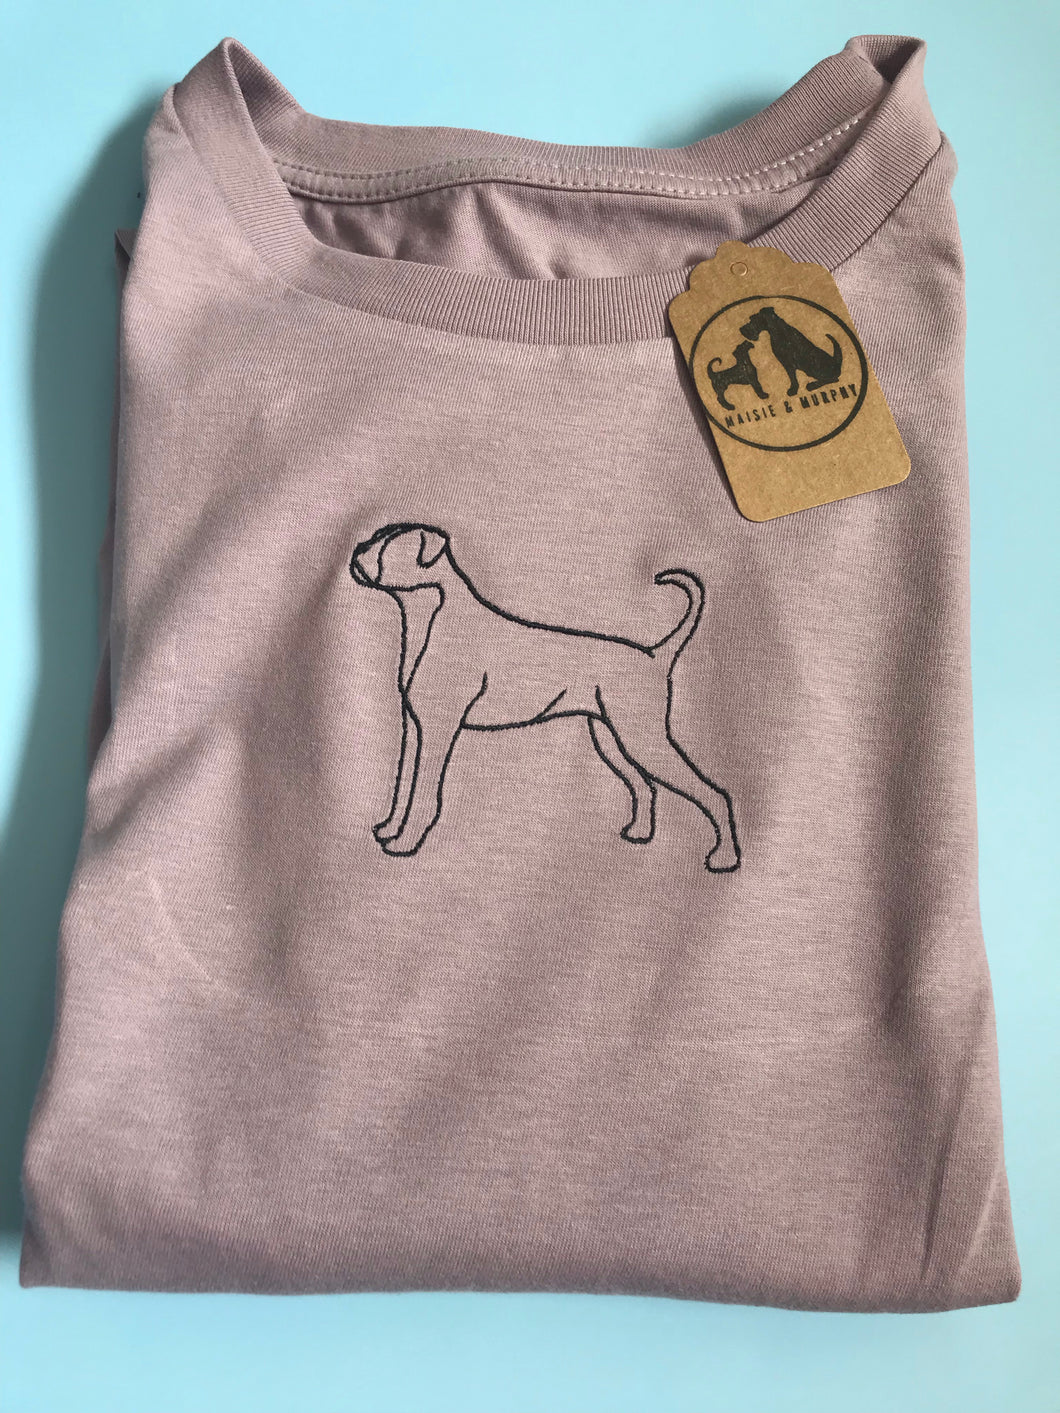 Embroidered Boxer Silhouette Sweatshirt- Gifts for boxer dog  lovers and owners